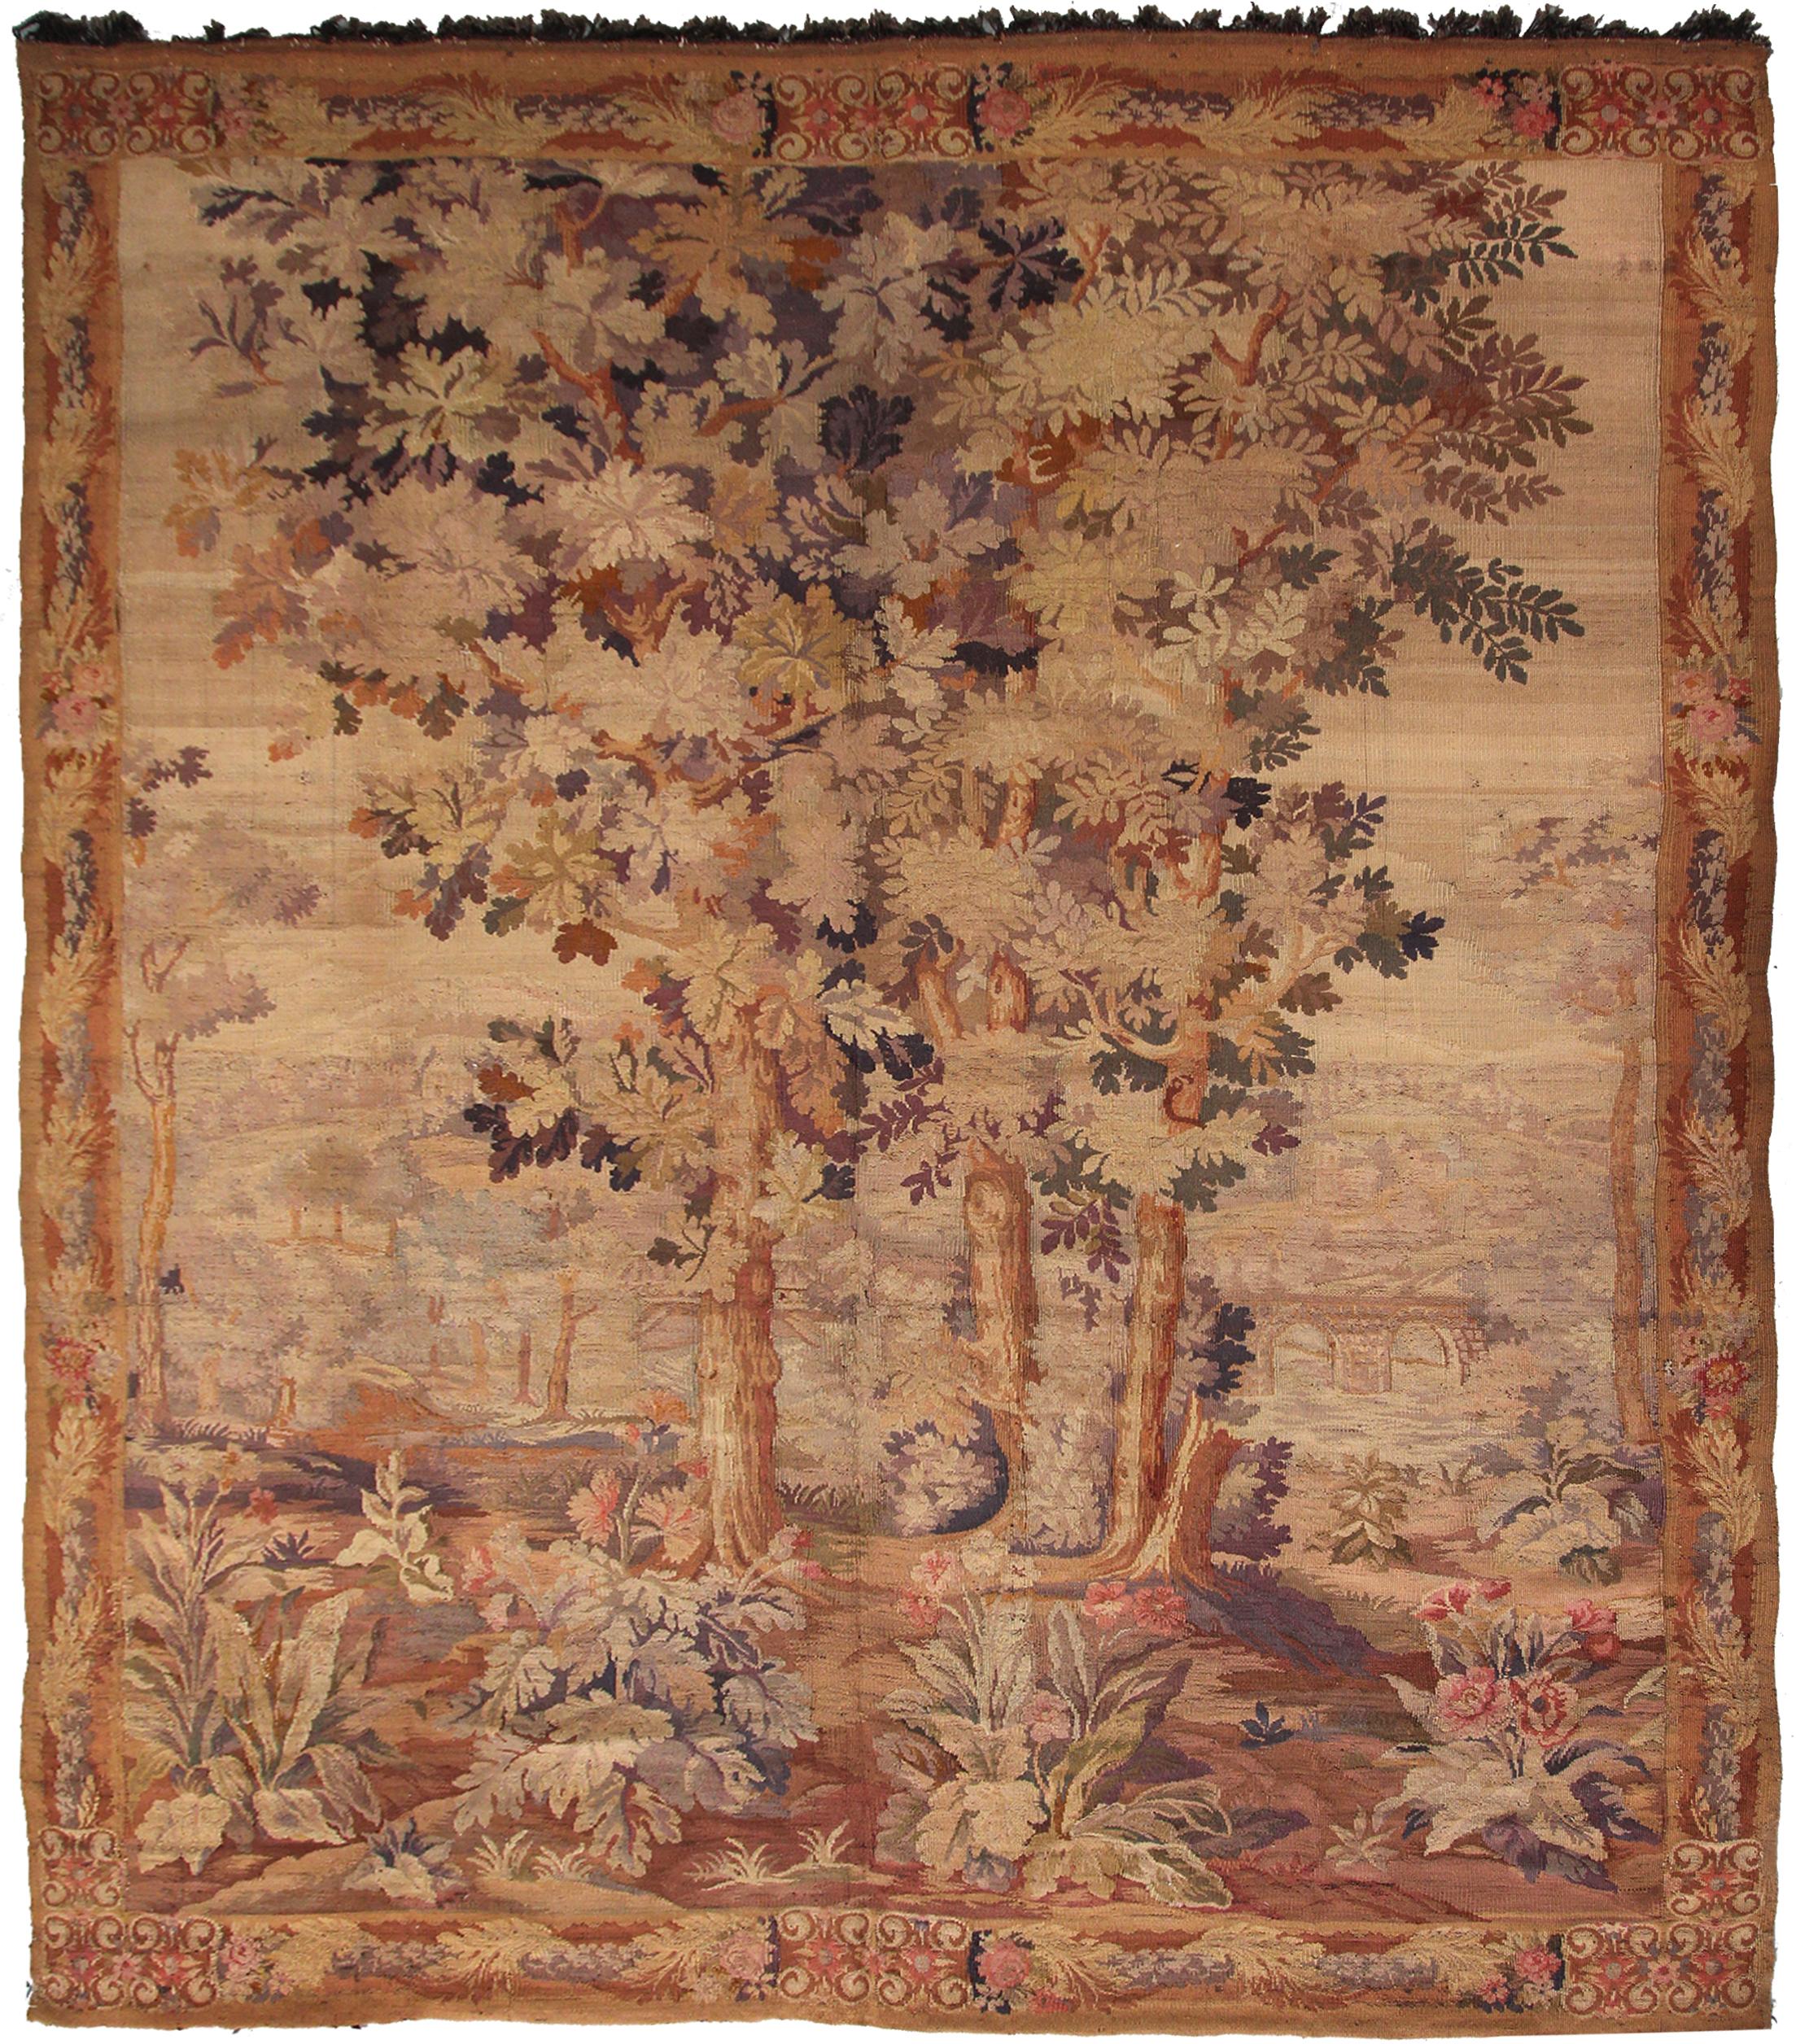 Antique French tapestry oversized tapestry rare of life 8' x 9'4